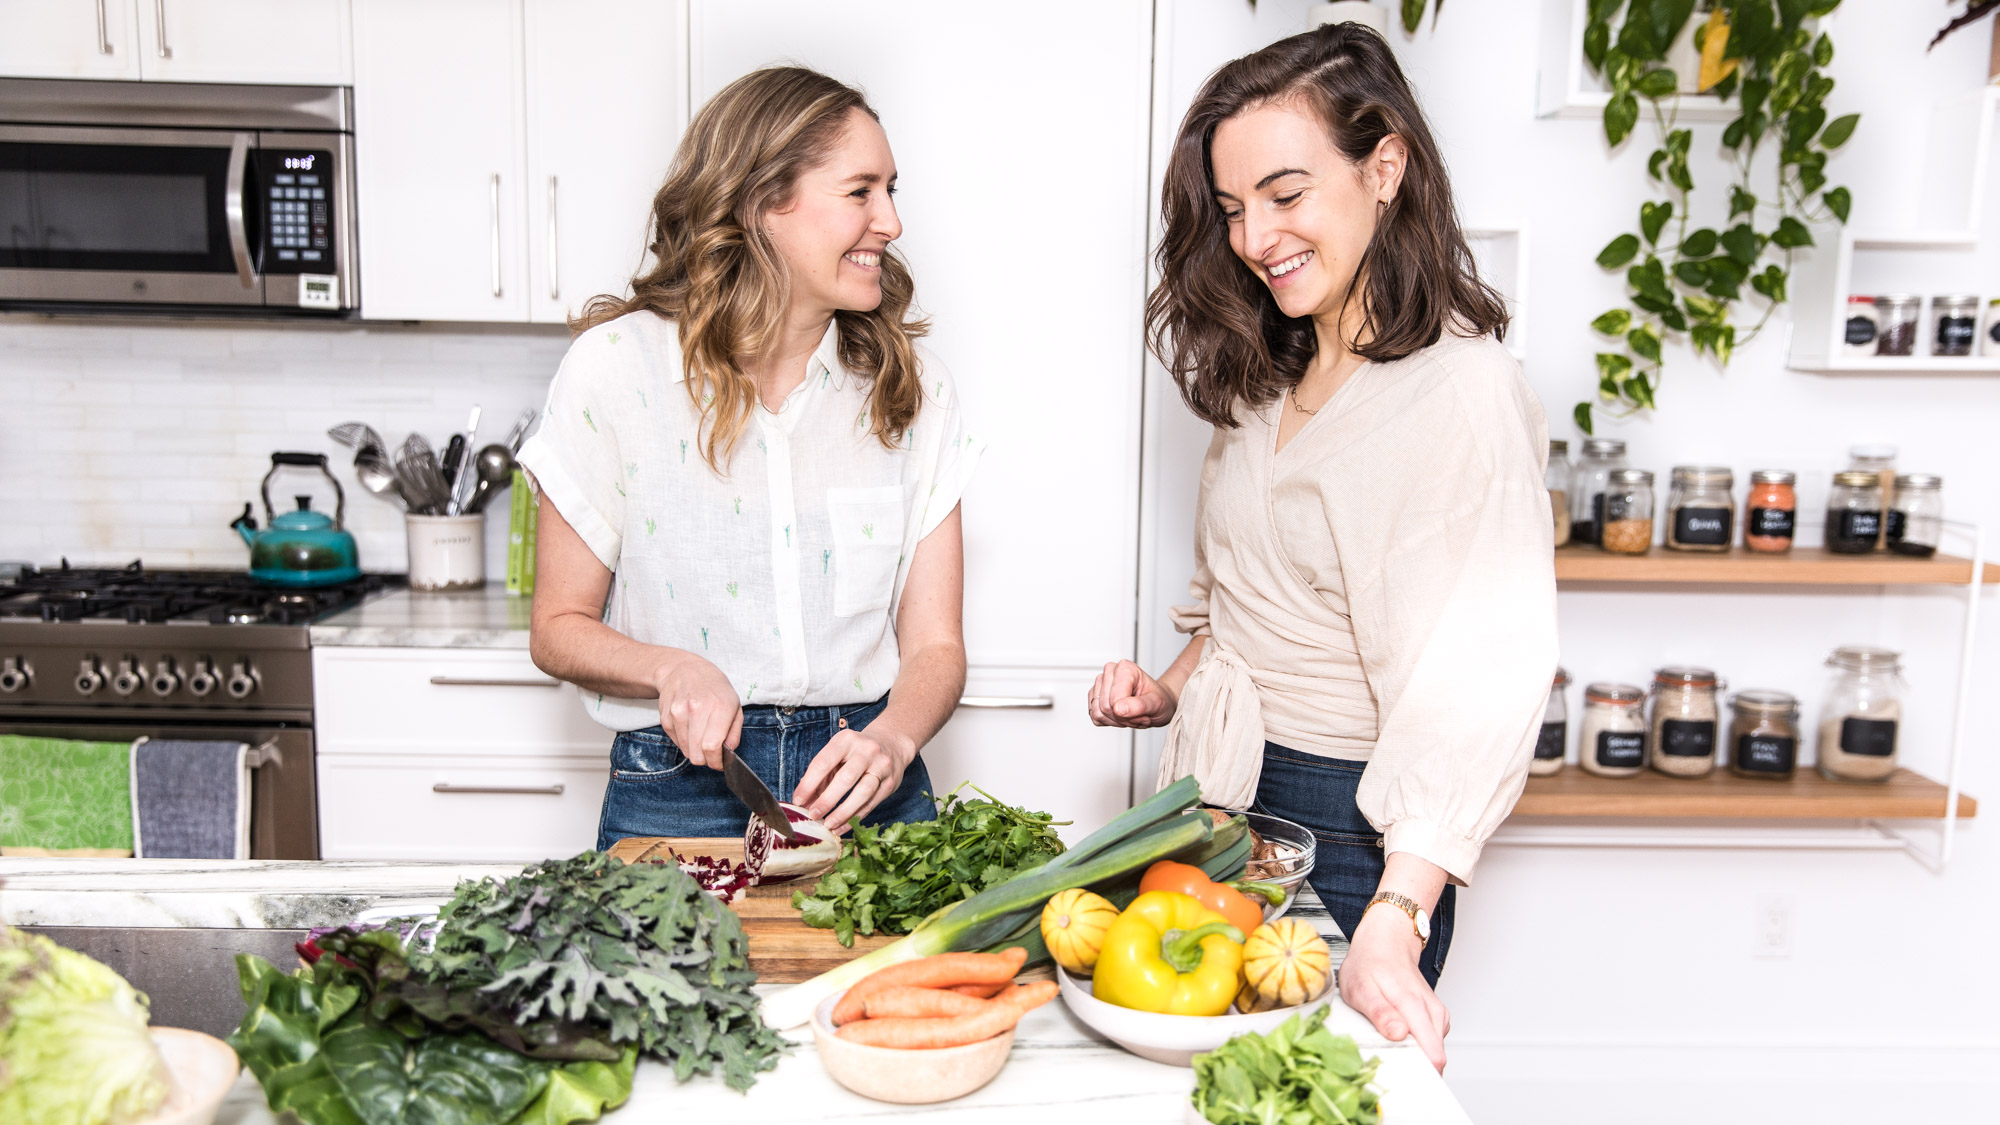 Private Cooking Class NYC Phoebe Lapine and Erica Adler - New York City in Home Classes